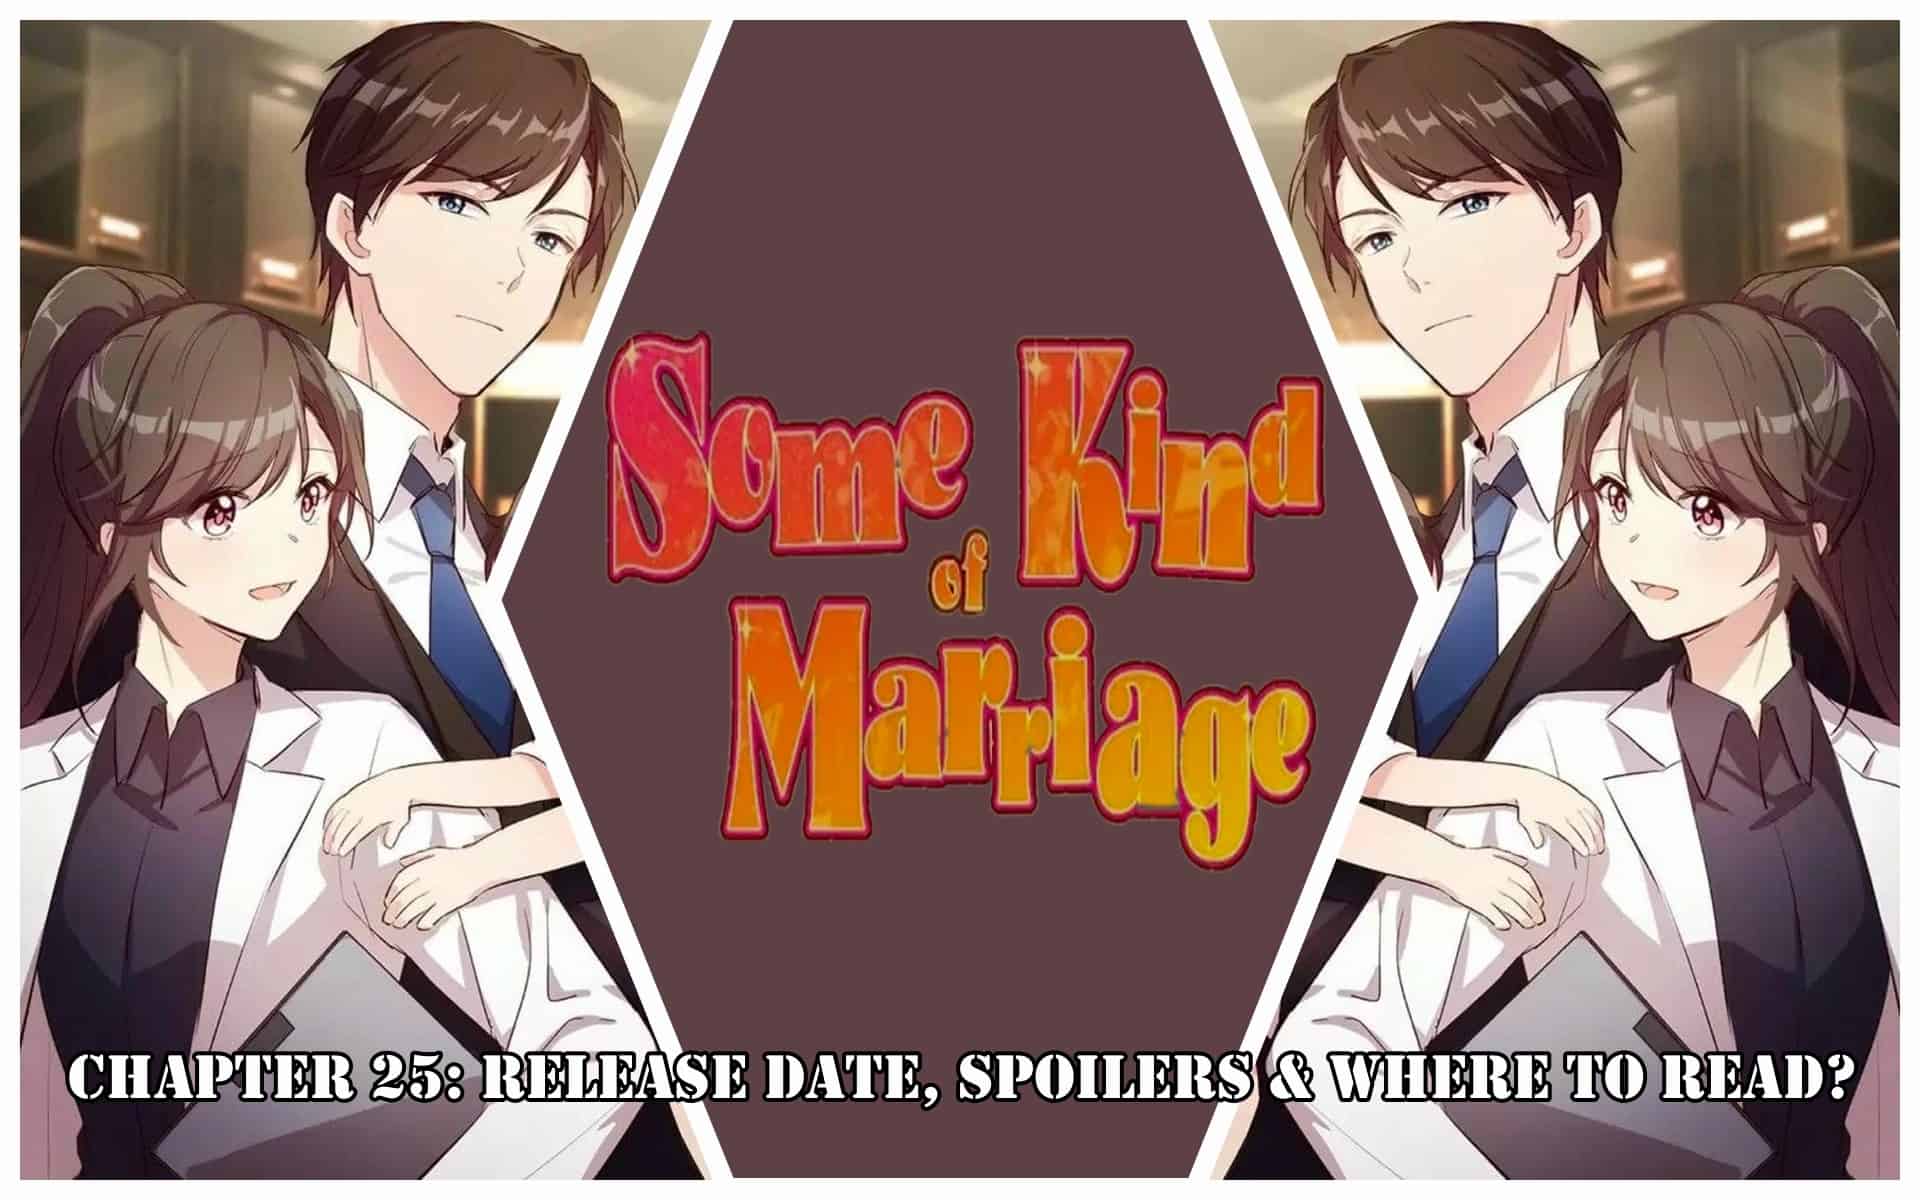 Some Kind Of Marriage Chapter 25: Release Date, Spoilers & Where to Read?